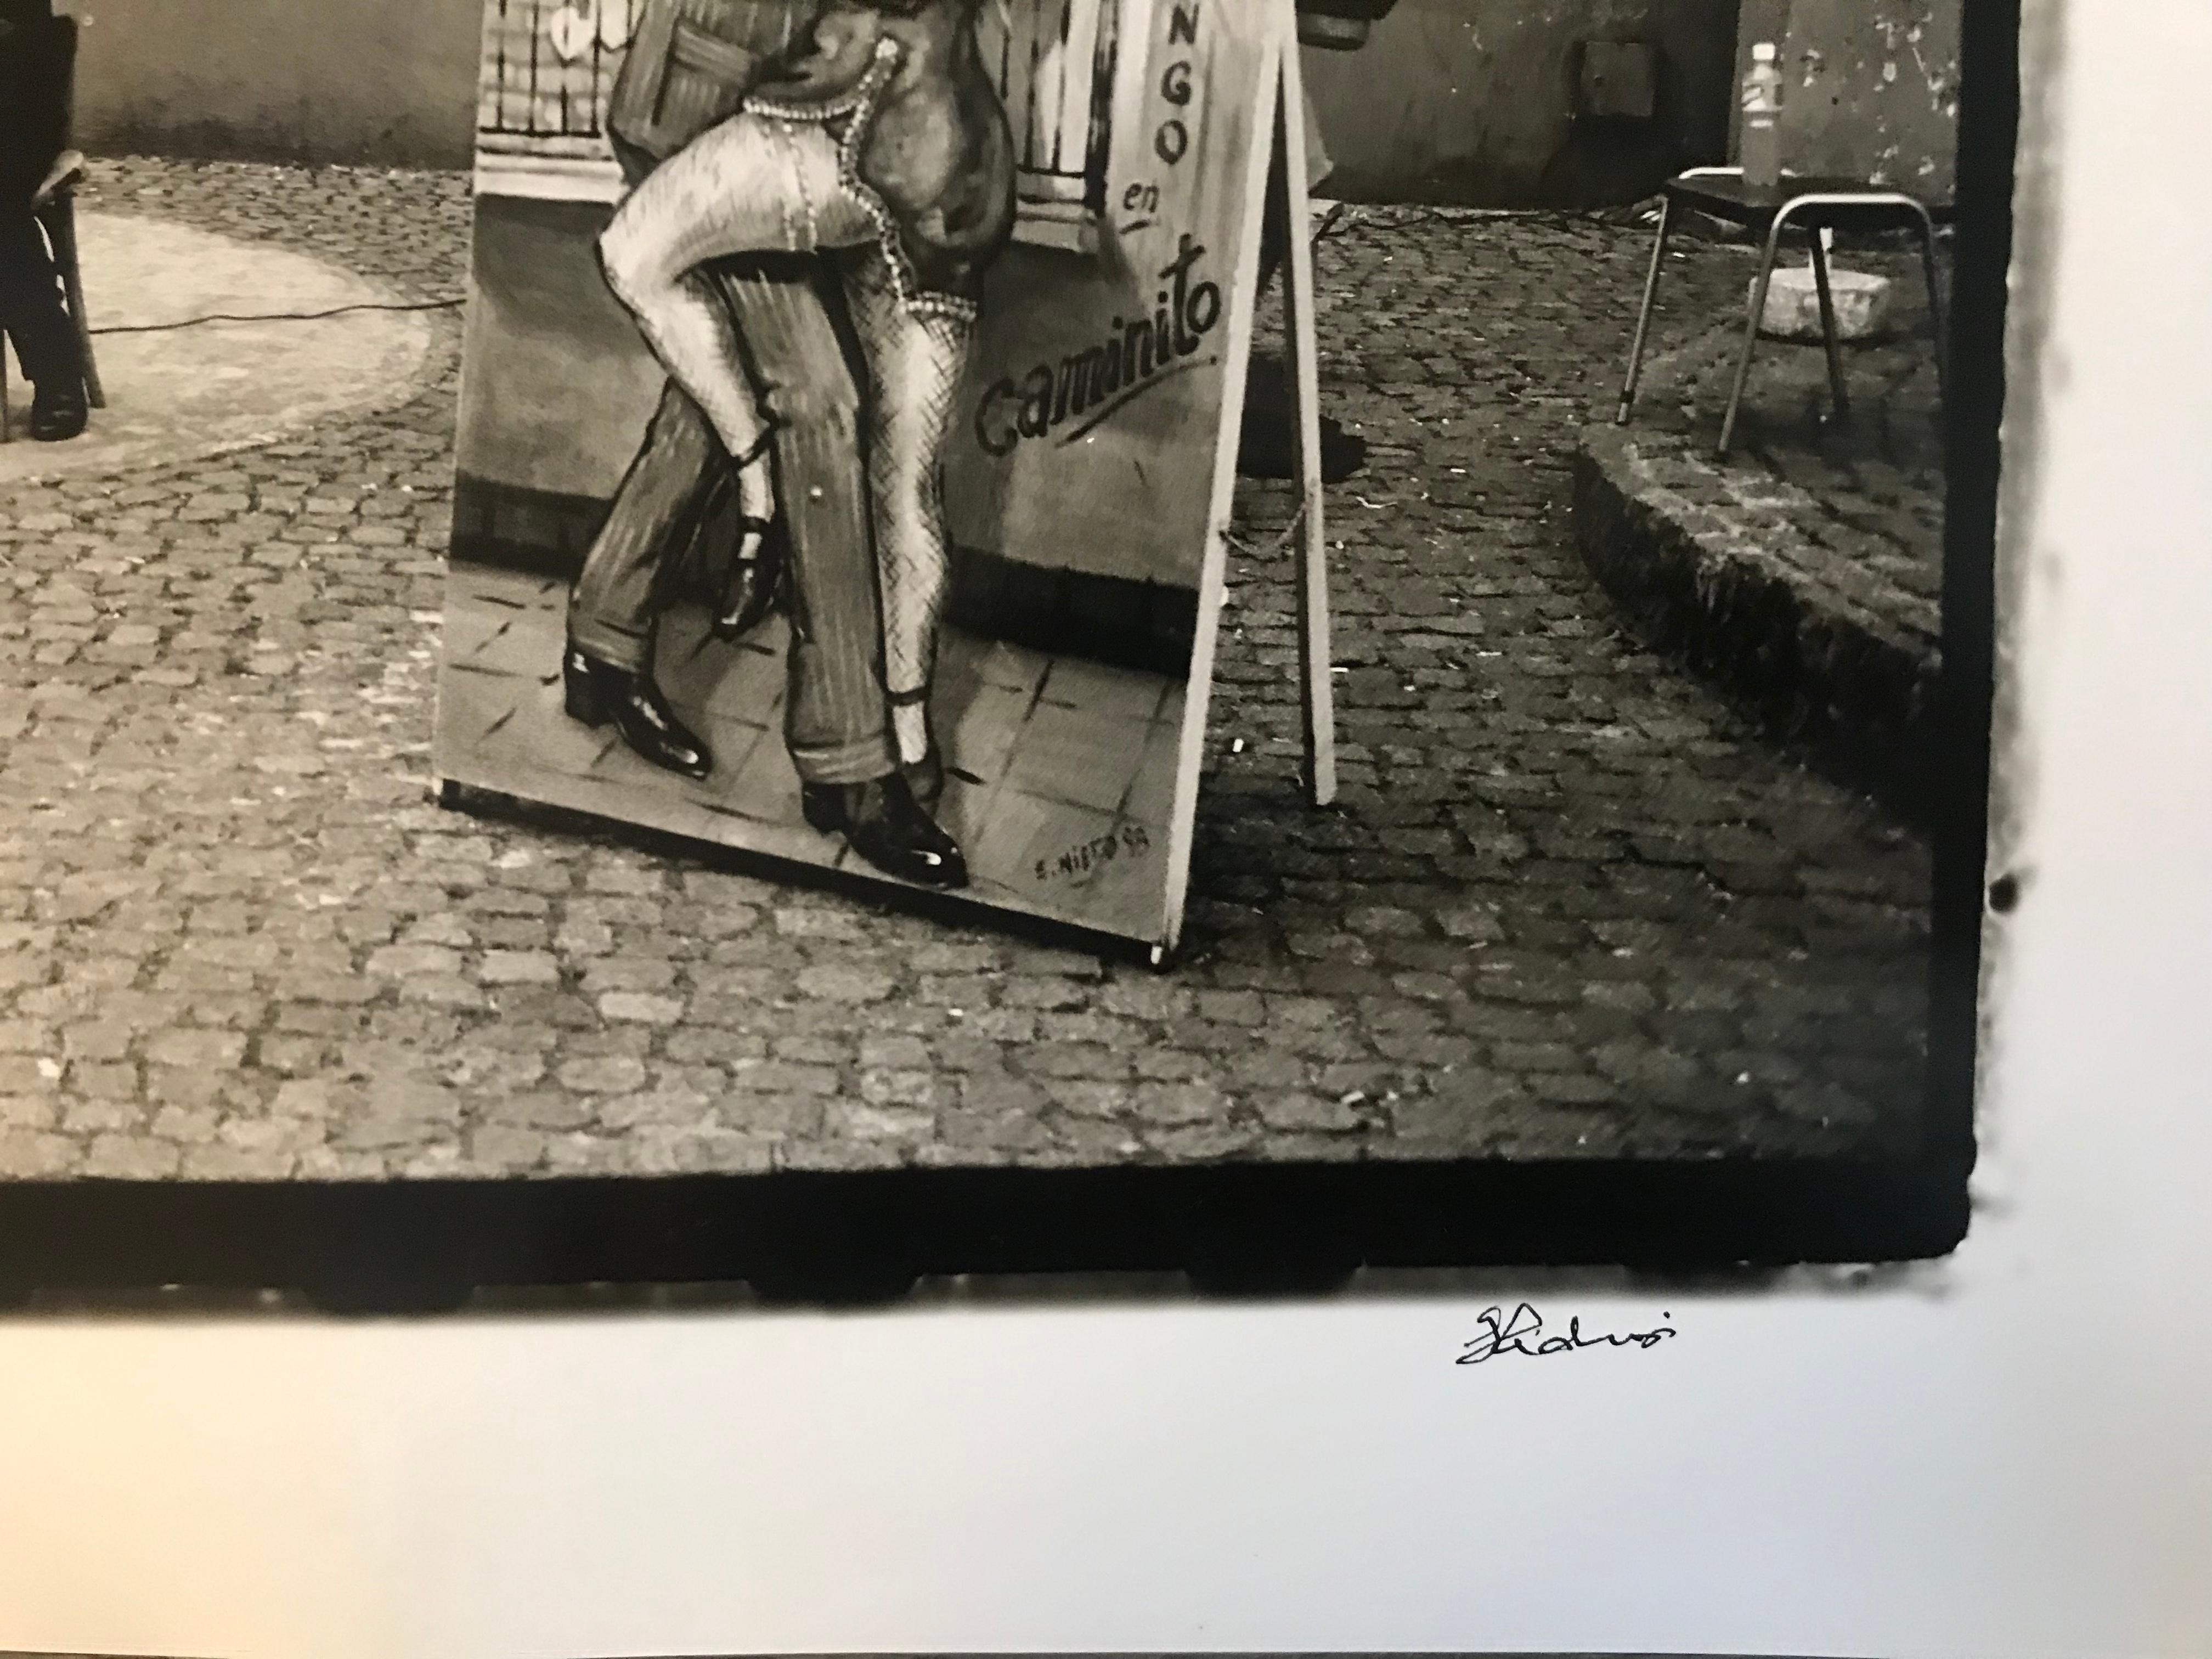 Photos of Hideoki™ are being sold for the first time in 2019. This piece is a one and only original artist silver gelatin print affixed with his signature in front of the photo.

Hideoki was born in 1942 in the mountains of Nagano in Suwa City,